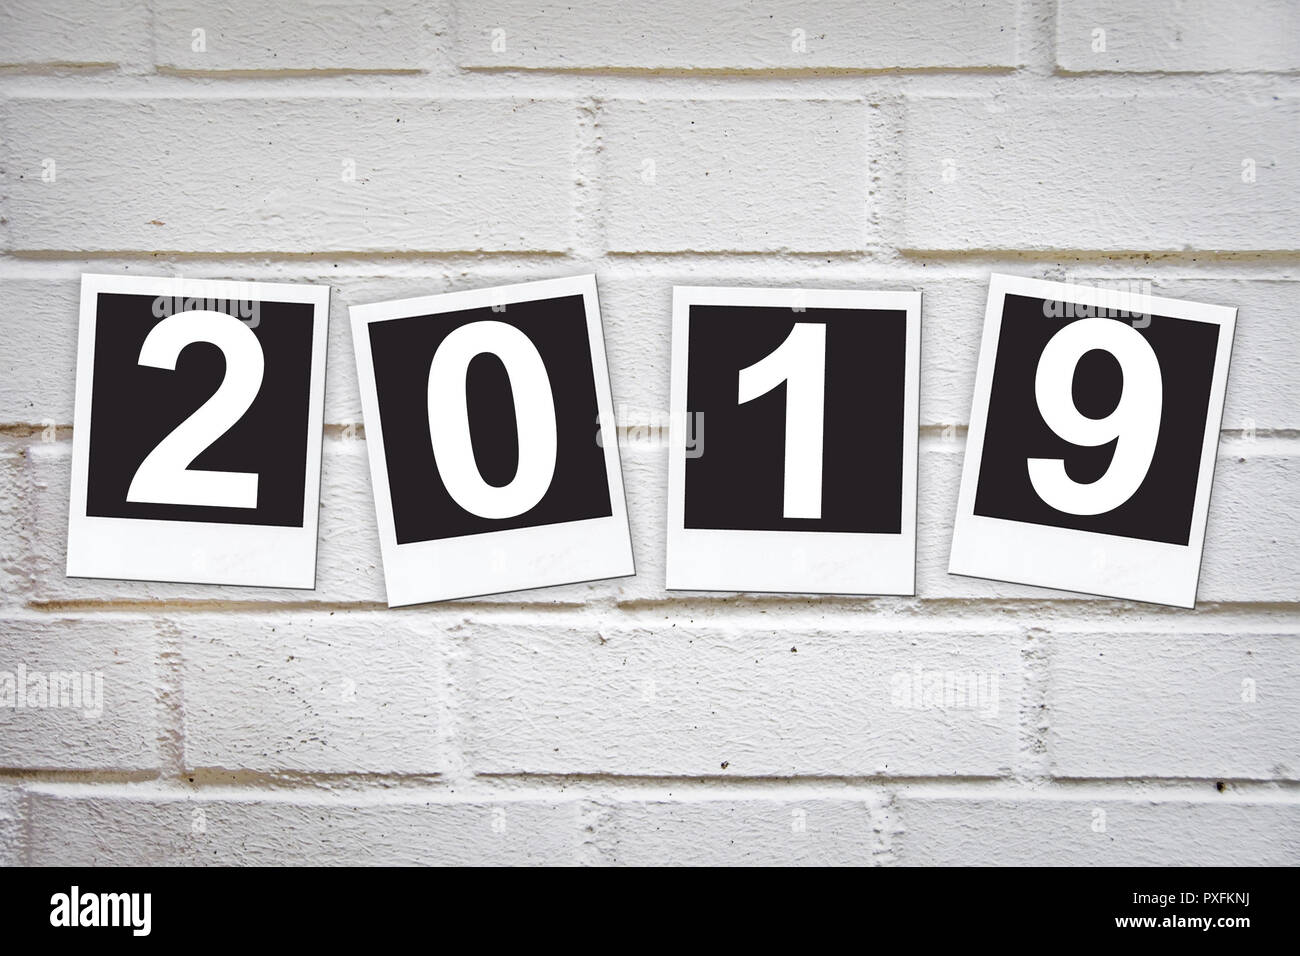 2019 in instant photo frames on a brick wall Stock Photo